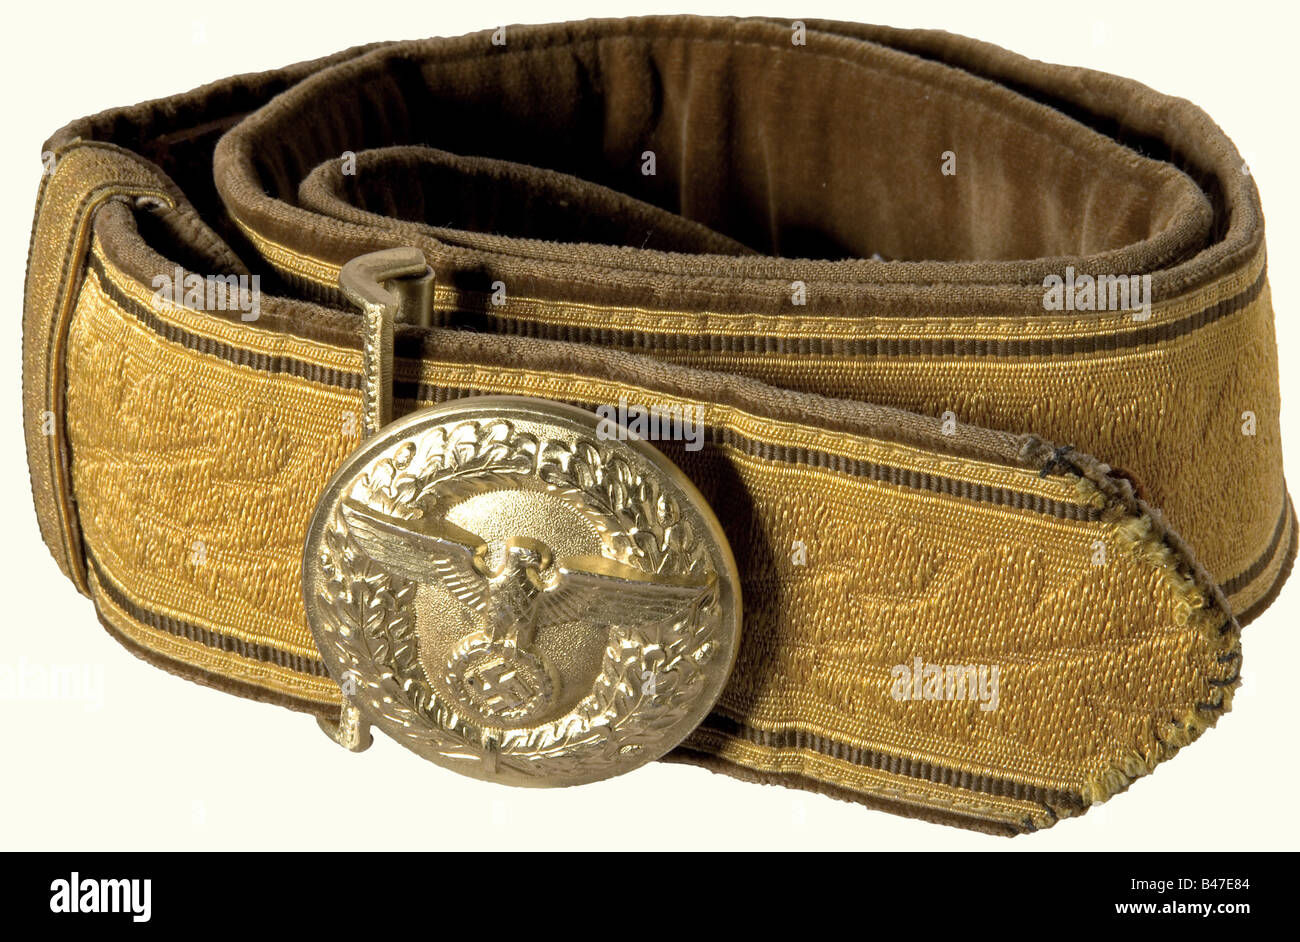 A parade belt for a Political Leader., Gold-coloured cello version with oak leaf decoration, brown velvet backing, golden anodized buckle (diameter 50 mm, manufacturer 'M4/24') and catch. Shortened. One of the two slides is missing, two small holes.' historic, historical, 1930s, 1930s, 20th century, party organisation, party organization, organisations, organizations, organization, organisation, party, parties, political party, German, Germany, NS, National Socialism, Nazism, Third Reich, German Reich, utensil, piece of equipment, utensils, object, objects, sti, Stock Photo